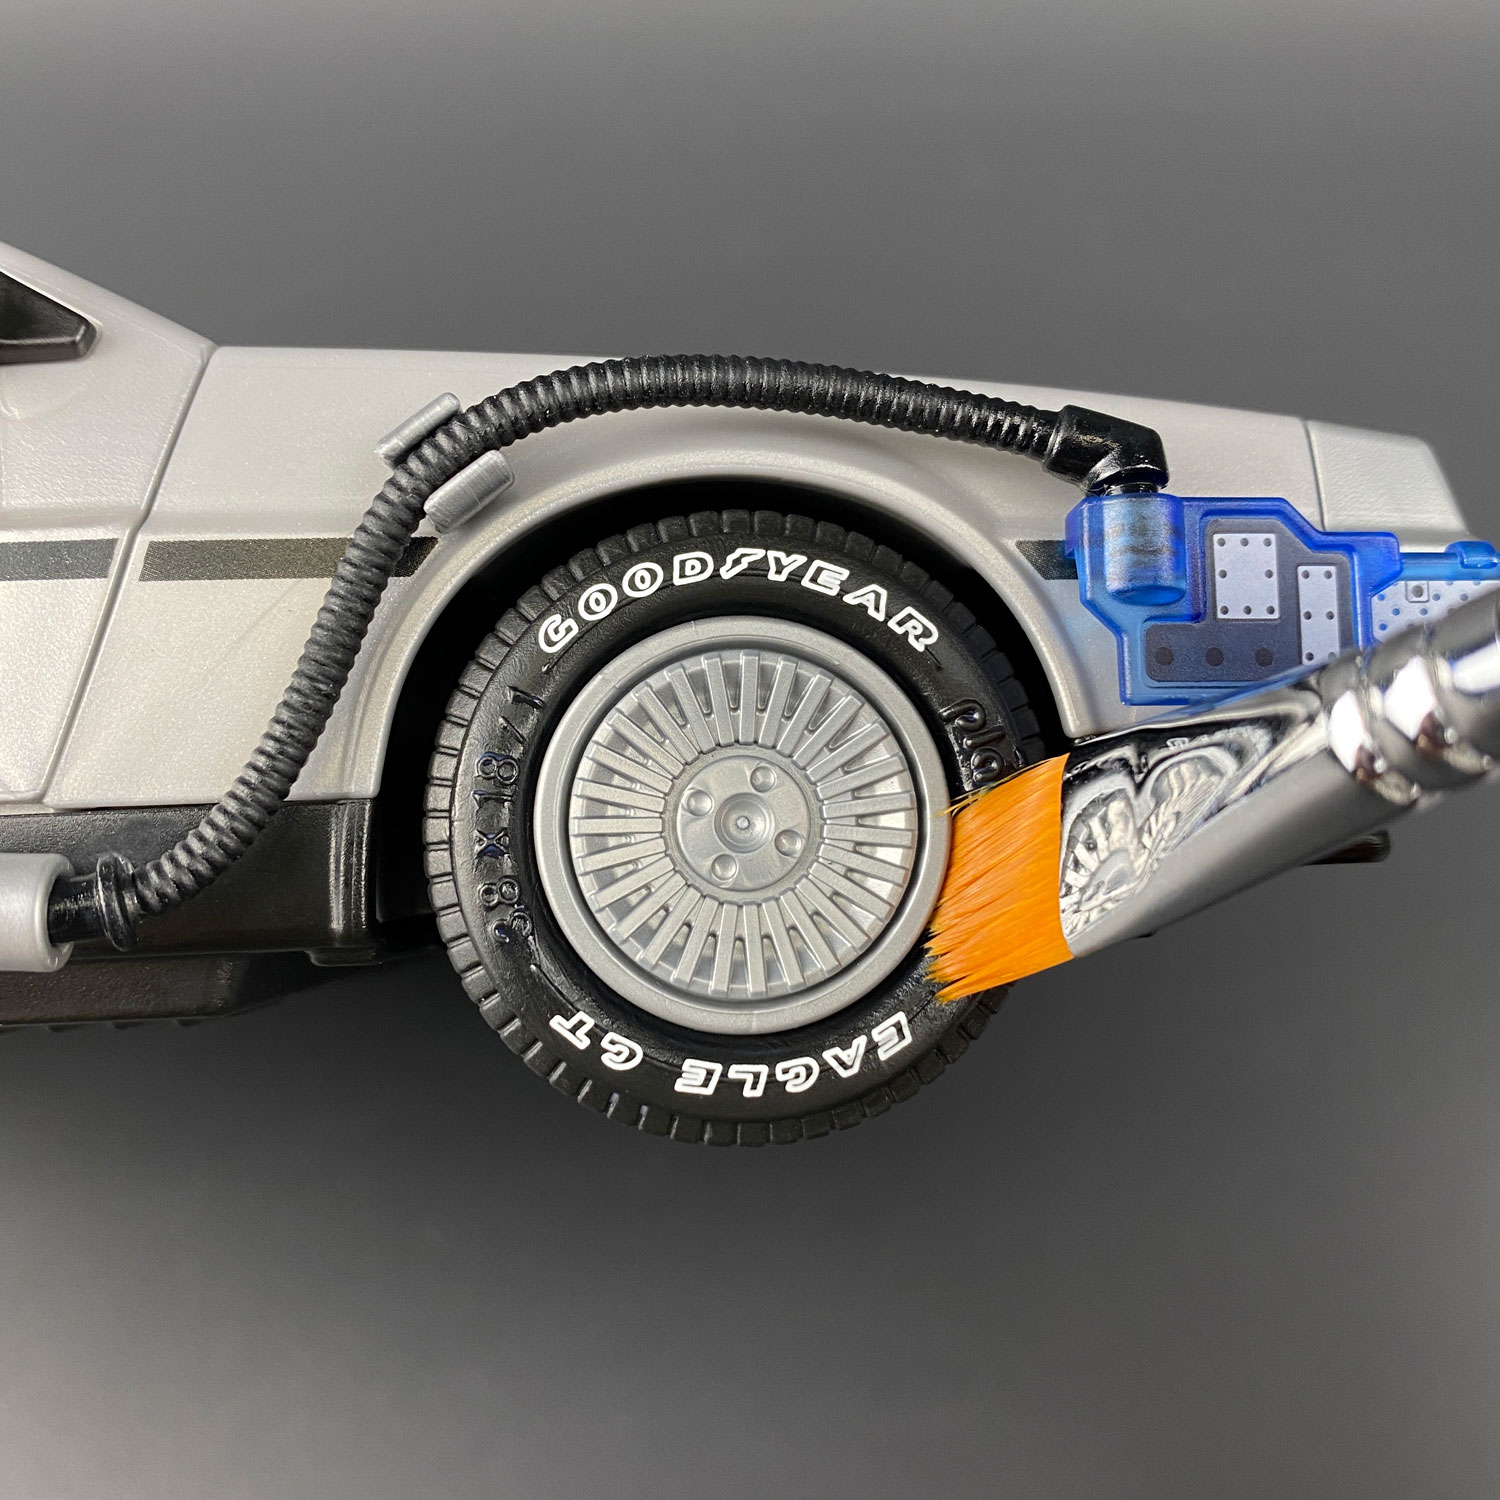 Applying Tyre Dressing to Hot Toys DeLorean tyre